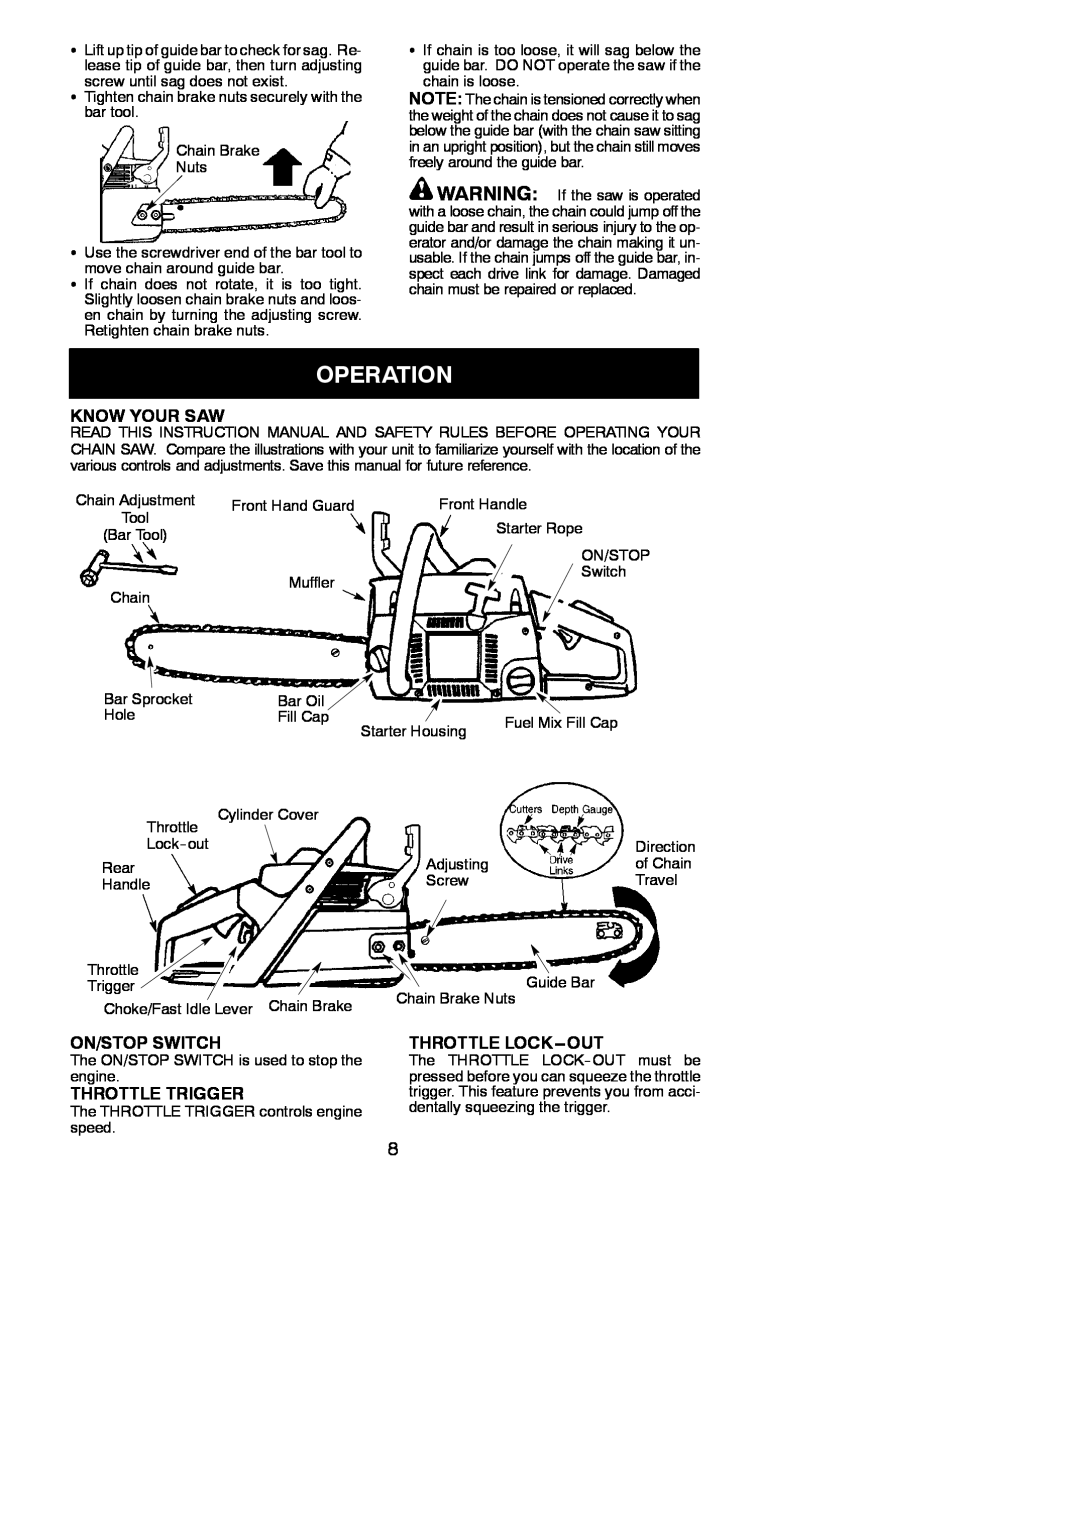 Poulan 545186802 instruction manual Operation, Know Your Saw, On/Stop Switch, Throttle Trigger, Throttle Lock---Out 